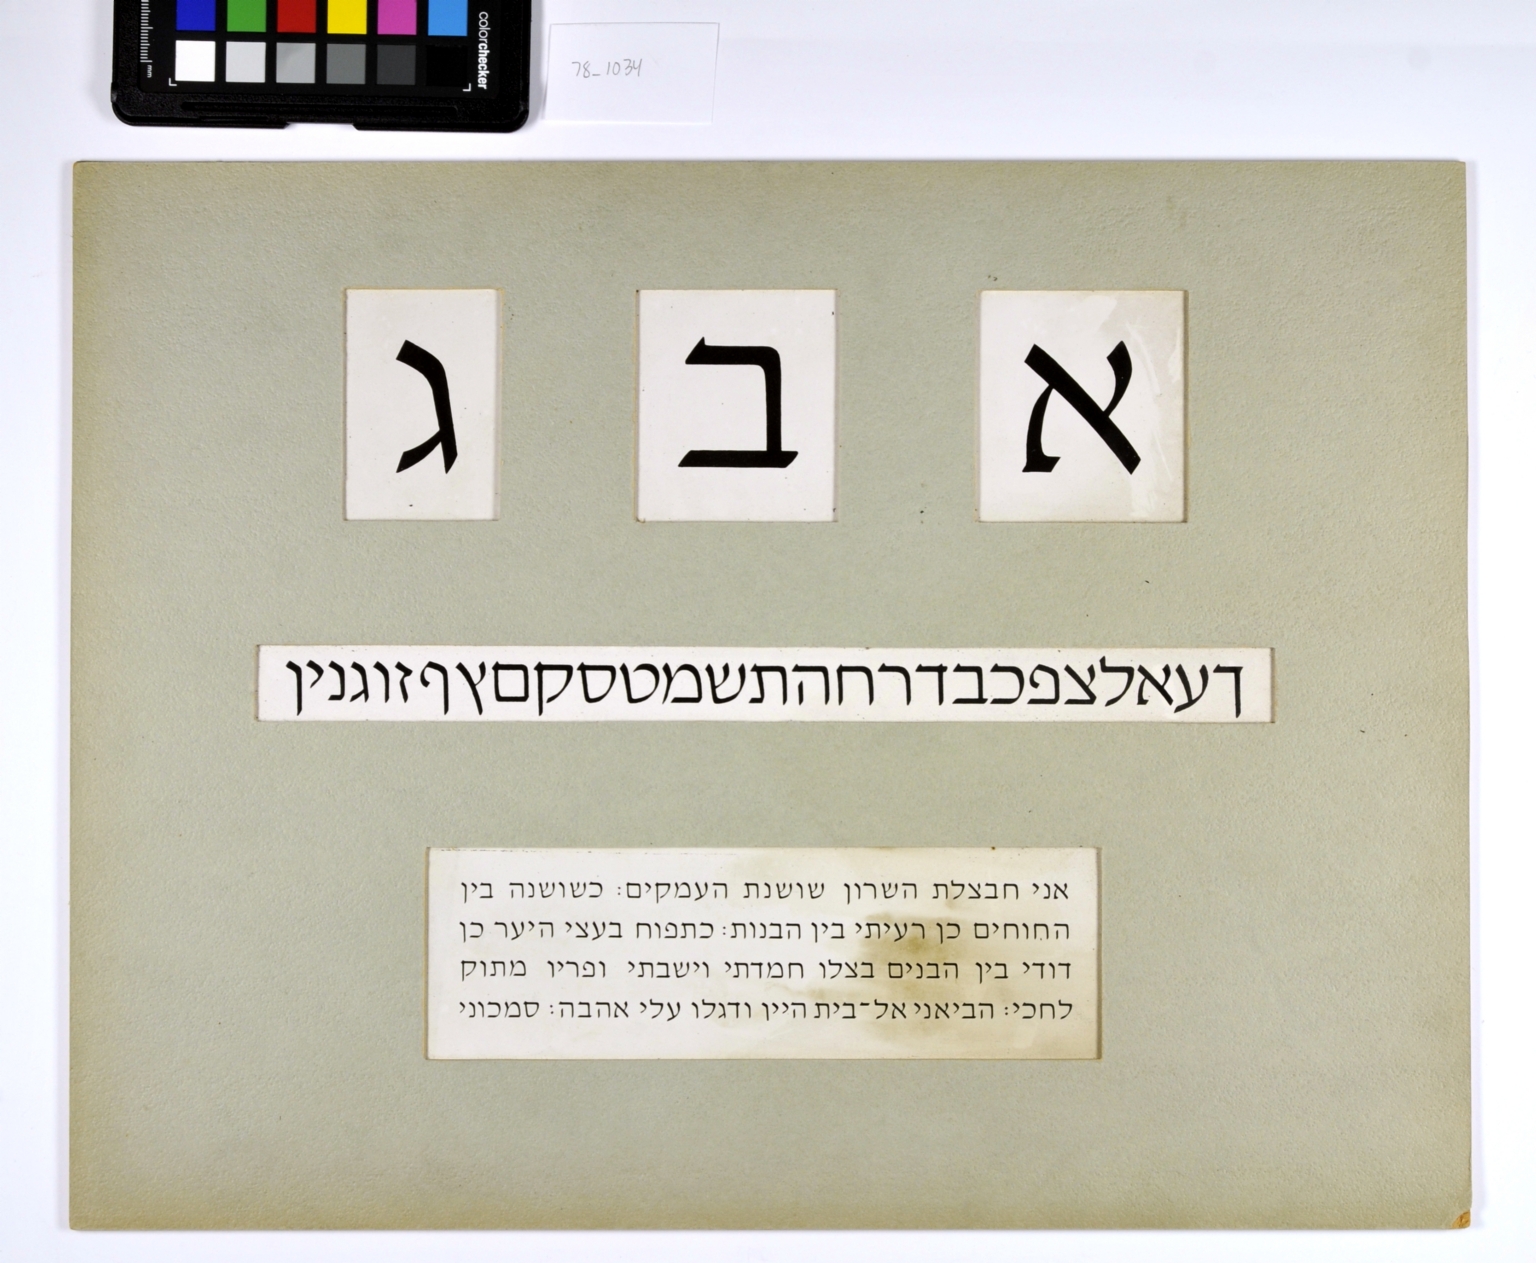 The David Hebrew typeface as presented in Ismar David's exhibition in the Jewish Museum in New York, 1953. Book style, regular weight.